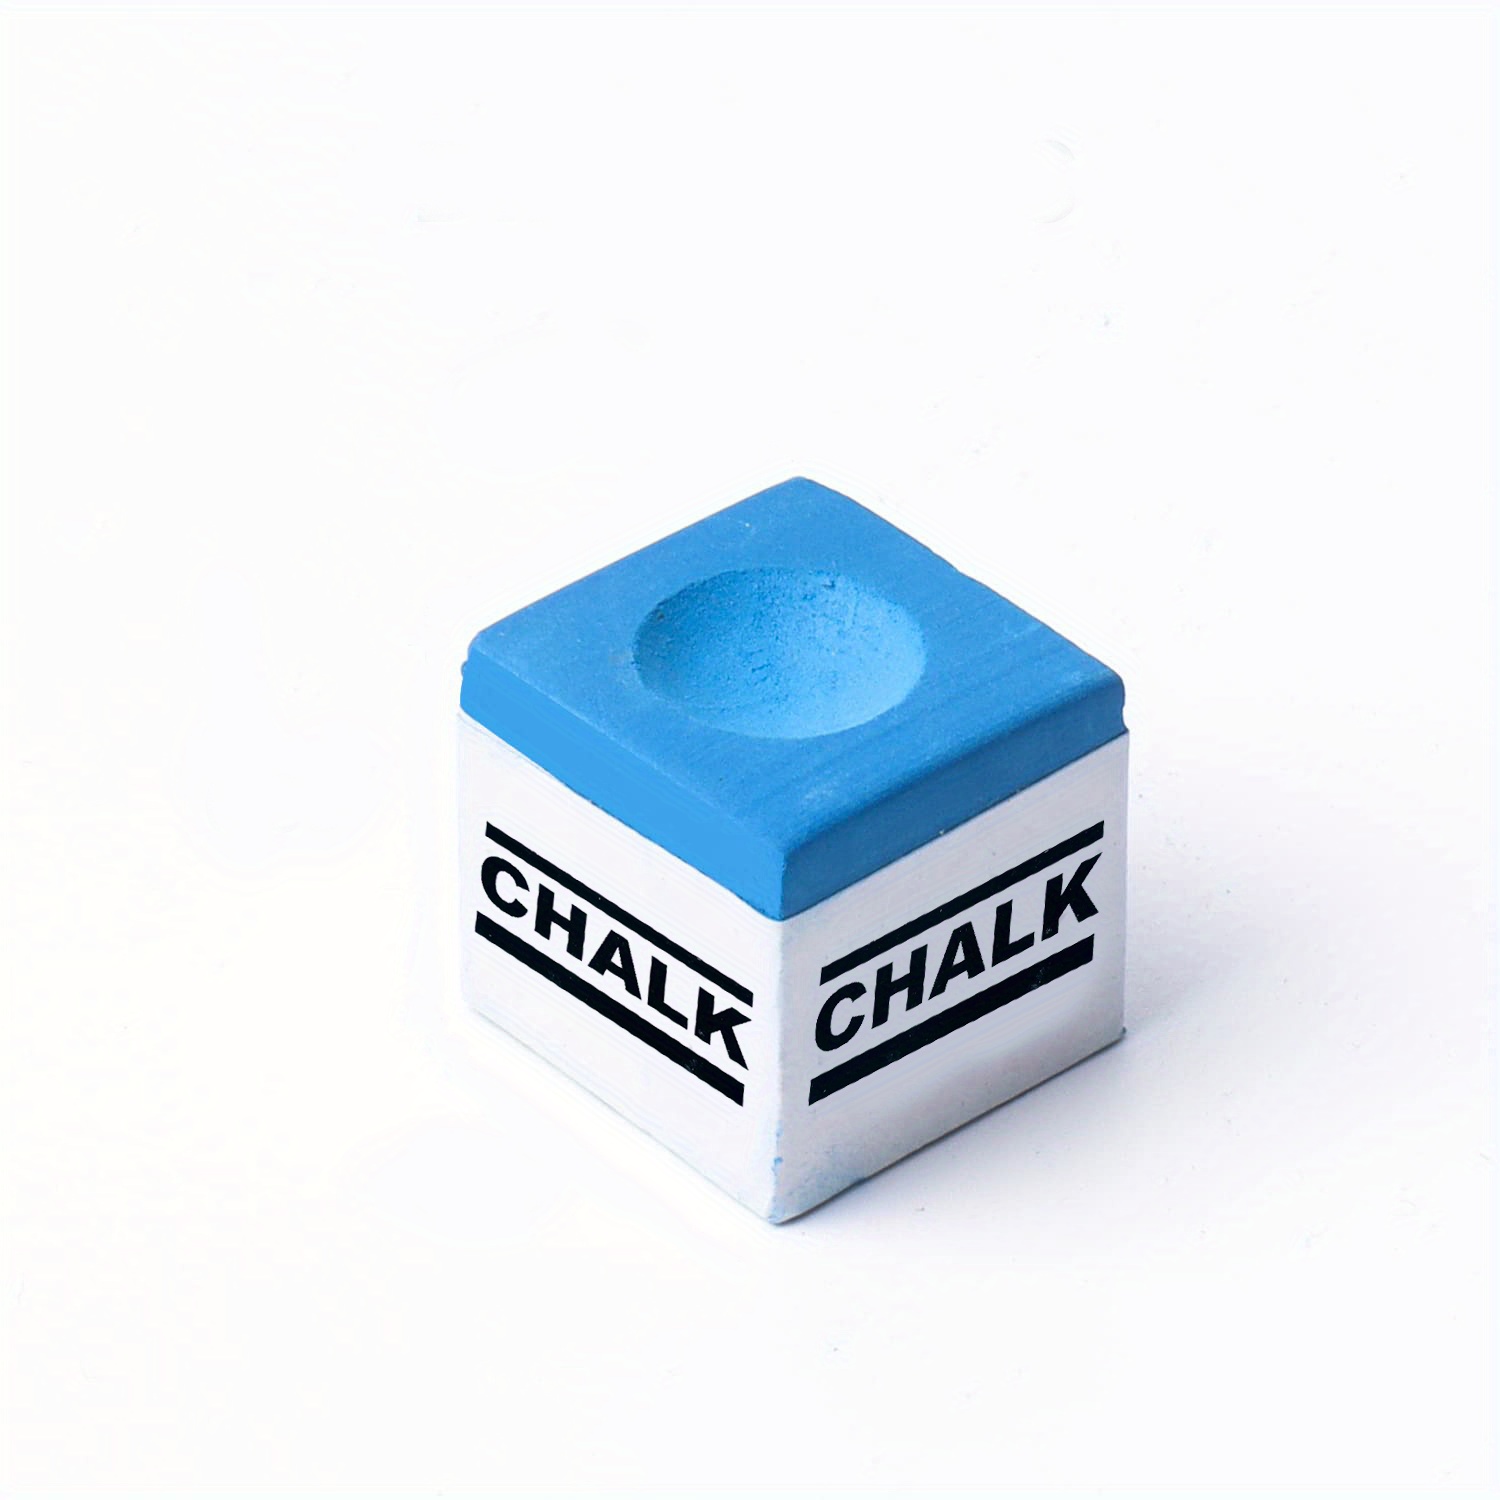 1pc Premium Pool Chalk Cubes Essential Pool Table Accessories For